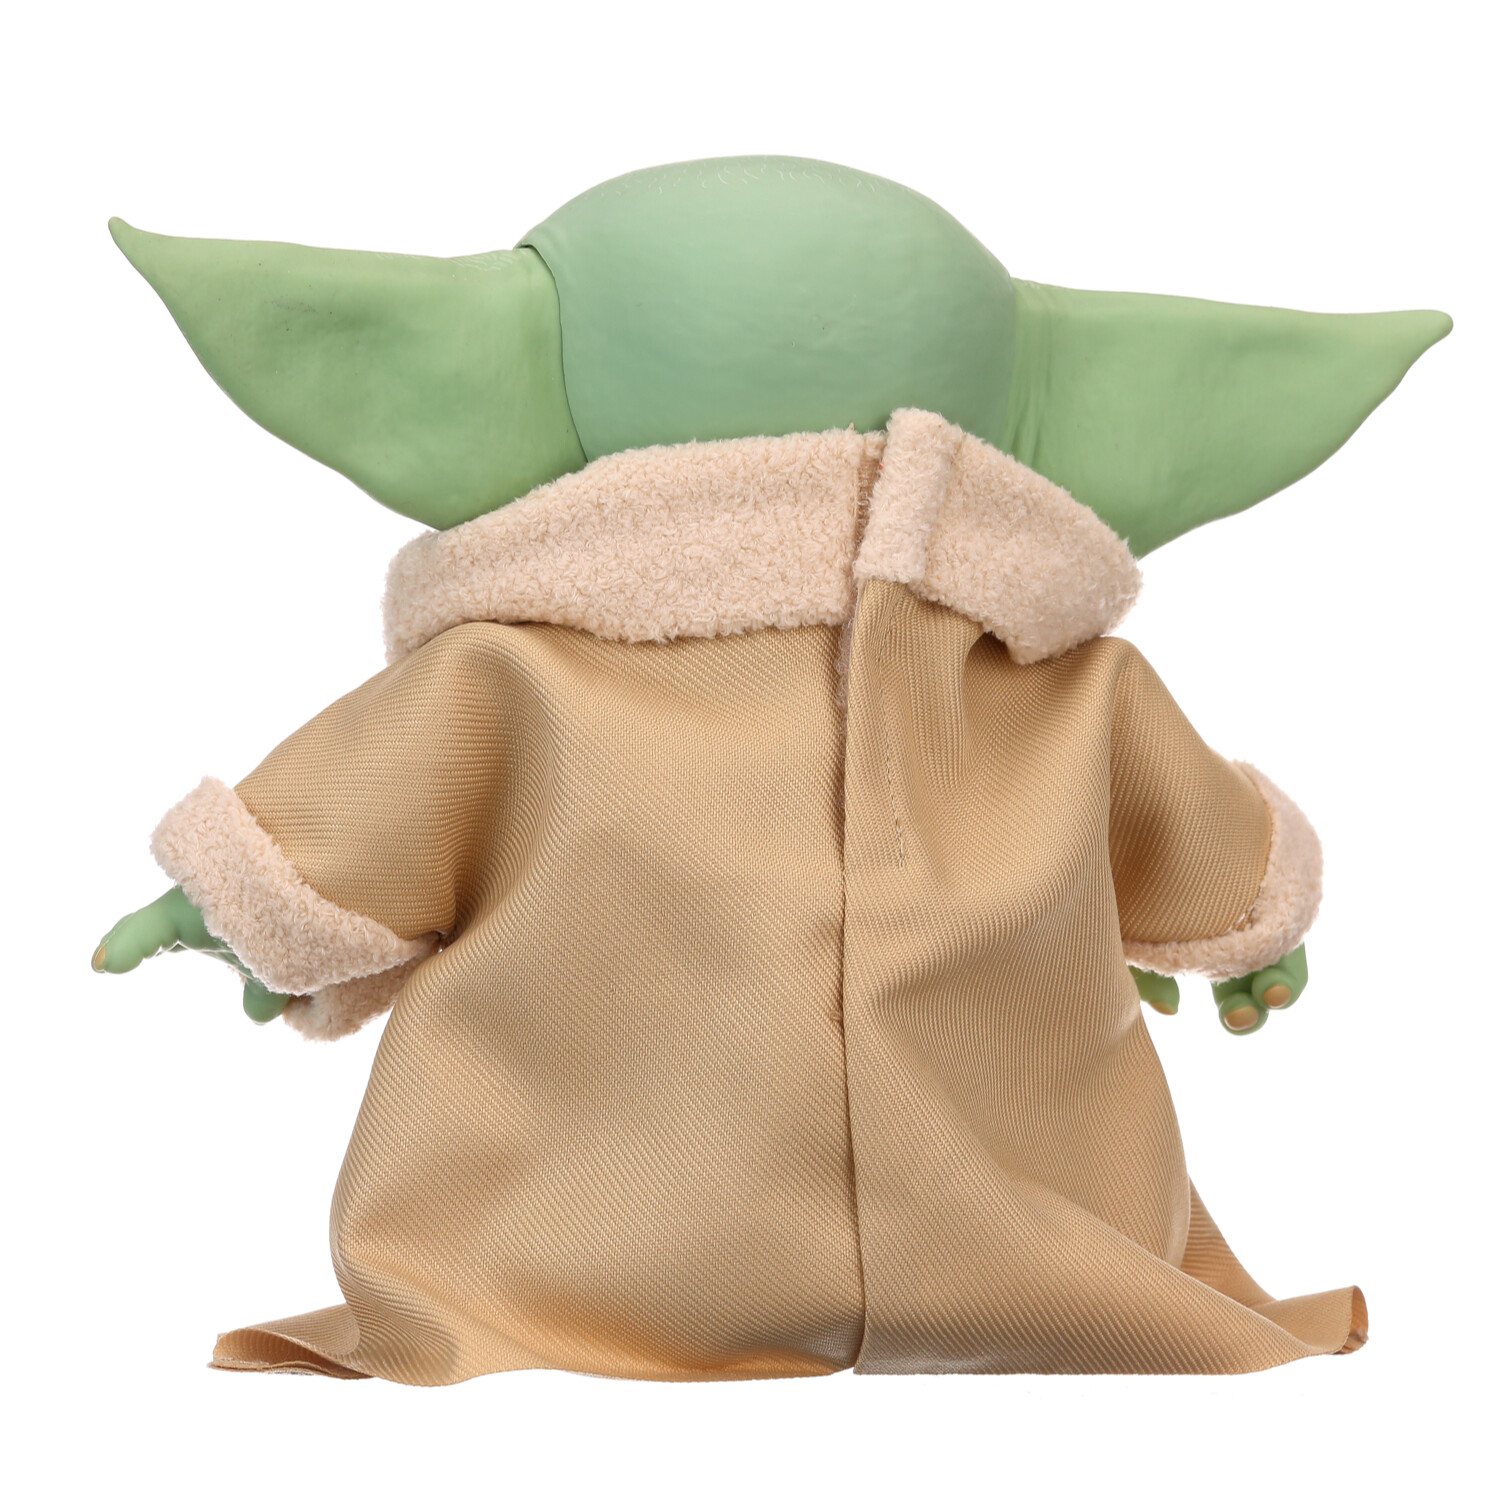 Star Wars Baby Yoda The Child Animatronic Figurine, 25+ Sound and Motion  Combinations 